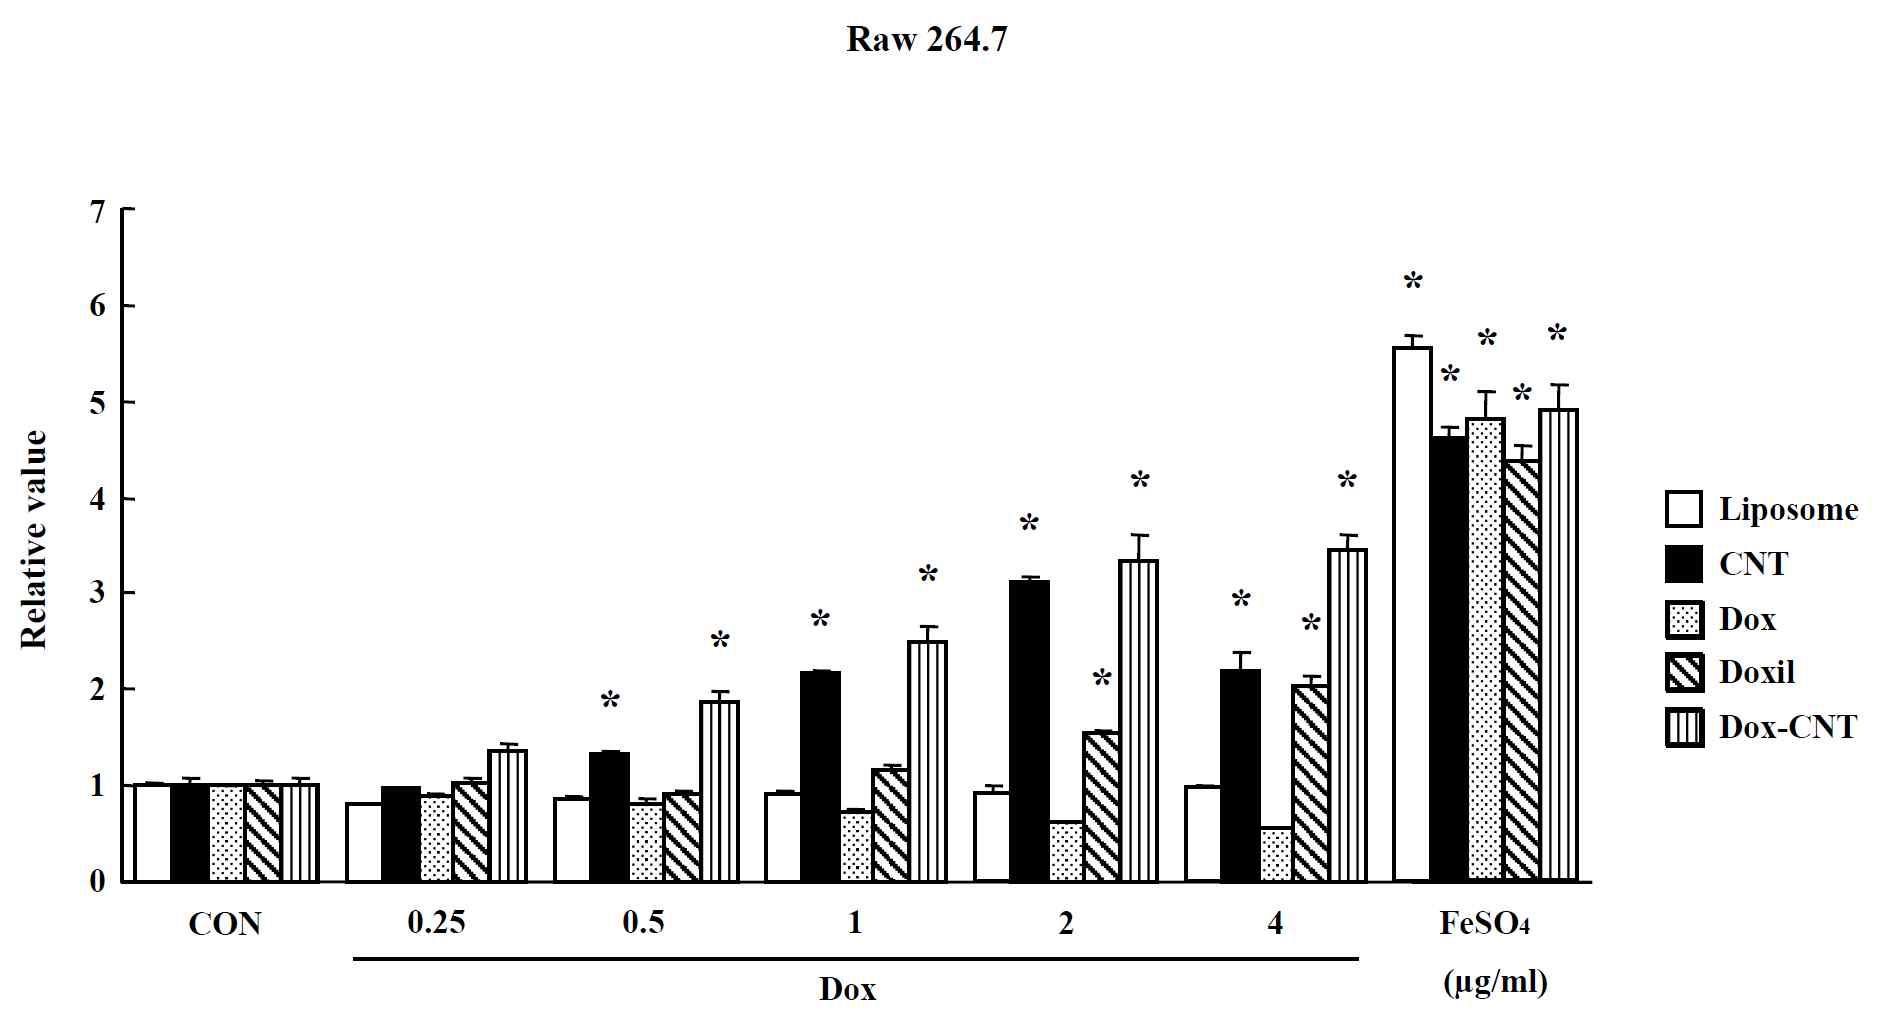 Effect of nano-anticancer drugs on oxidative stress in Raw264.7 cells. The level of ROS production was expressed as the relative value of the untreated control group after 24 hr exposure to nano-anticancer drugs. Data are shown as means ± SE (n = 5). * p<0.05, significantly different from the control